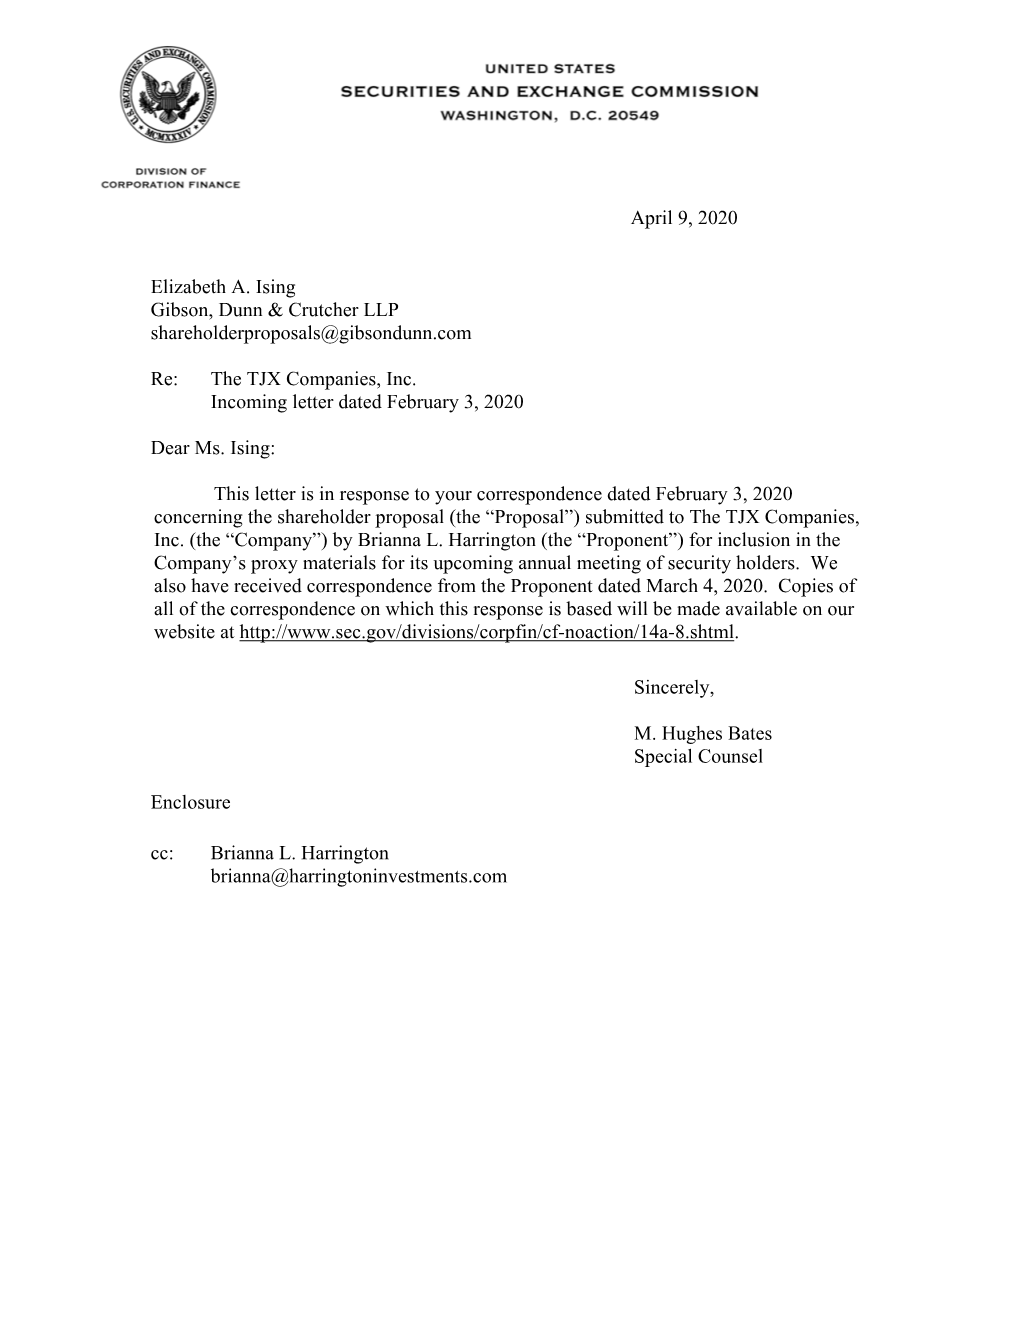 The TJX Companies, Inc. Incoming Letter Dated February 3, 2020